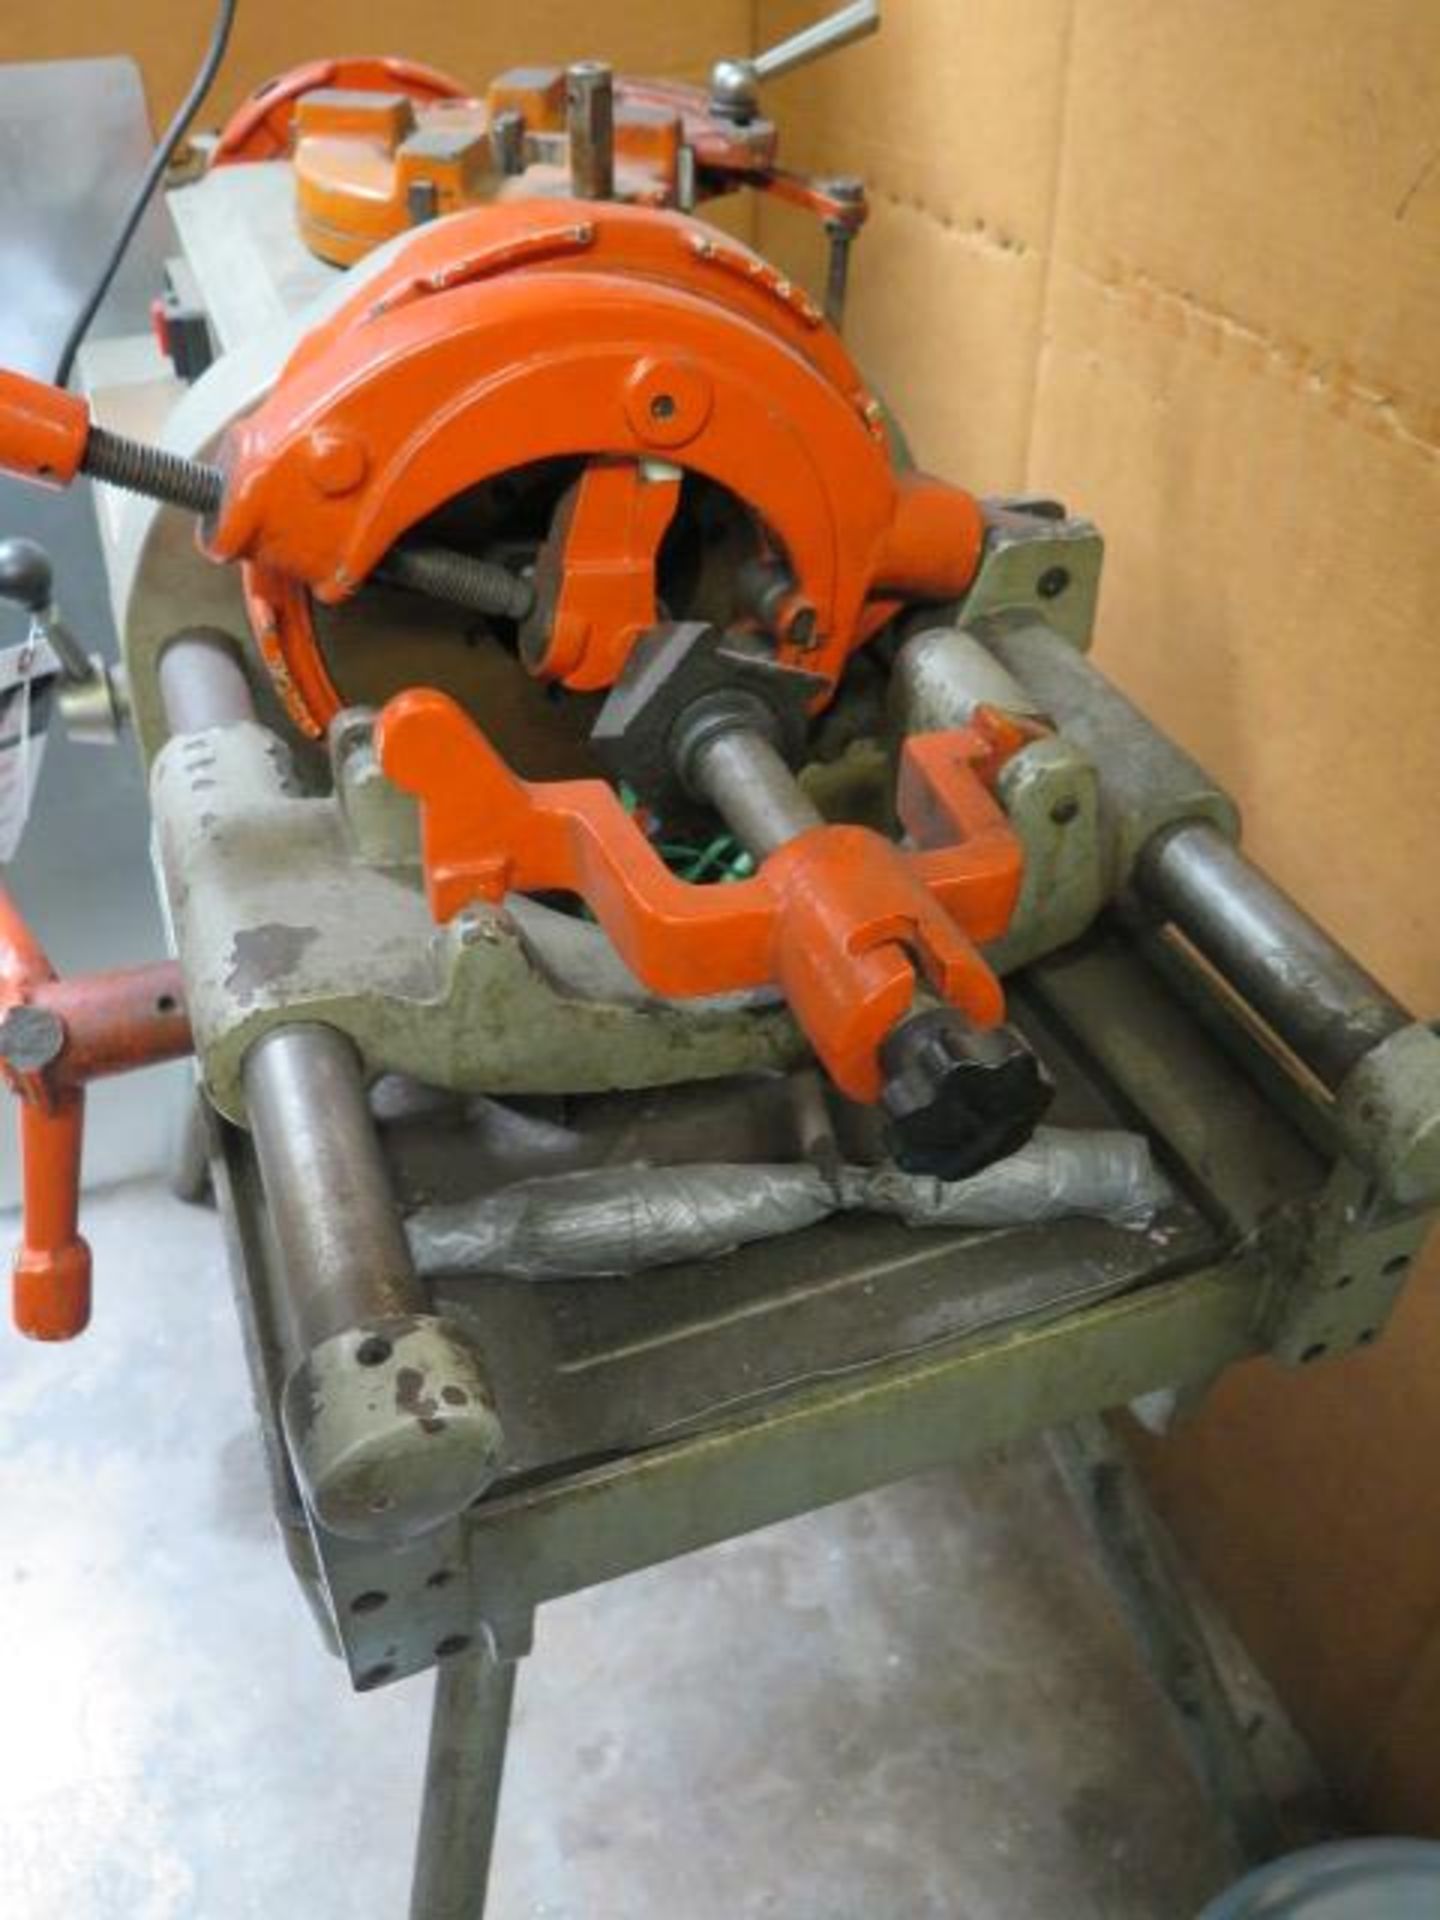 Hangzhau Z3T80 Pipe Cutting and Threading Machine s/n 5110002 (SOLD AS-IS – NO WARRANTY) - Image 7 of 9